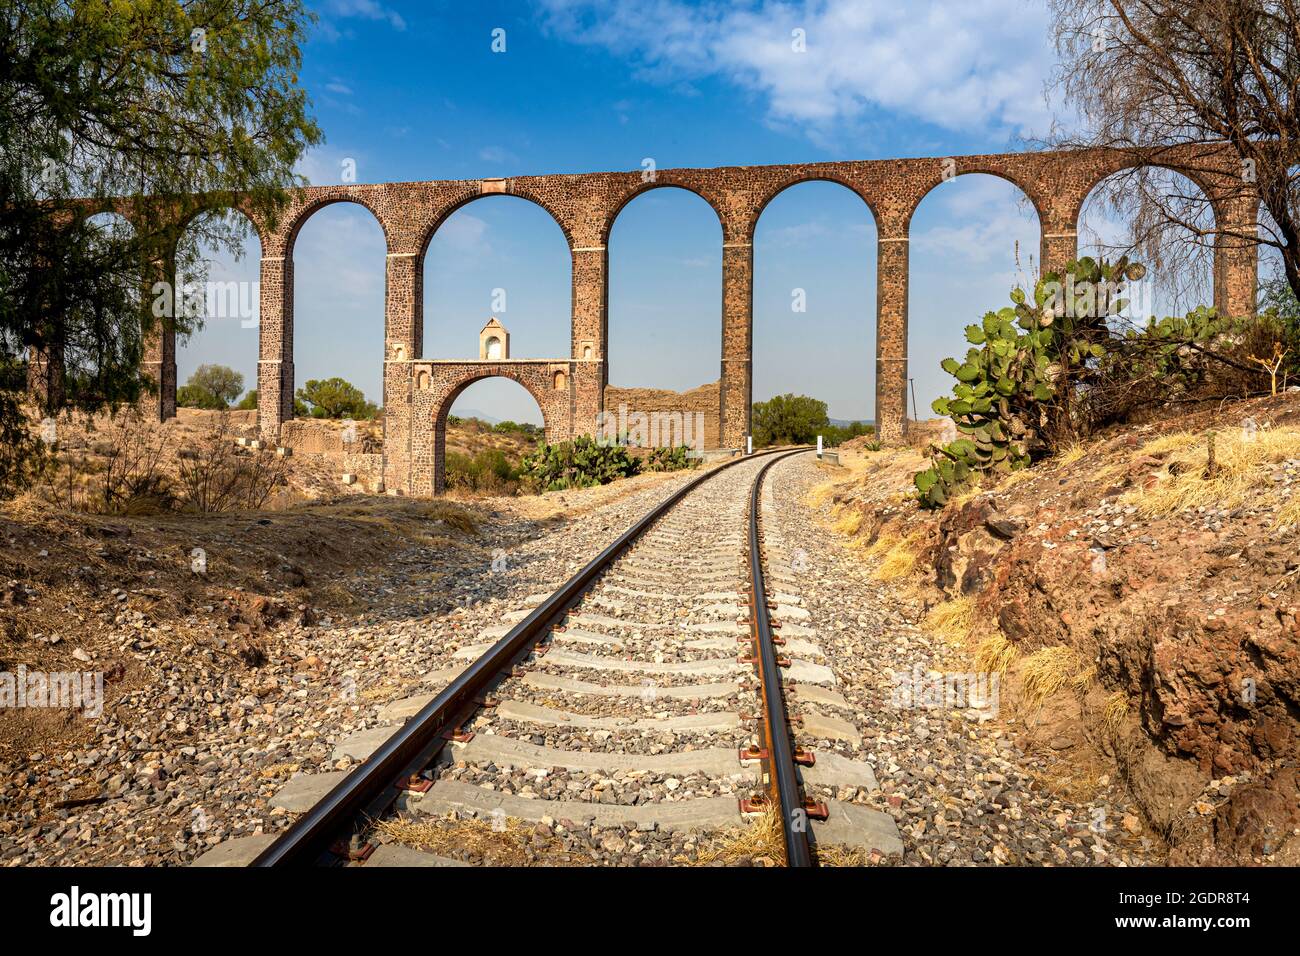 Father Tembleque Aqueduct and railroad tracks in the countryside of Hidalgo, Mexico. Stock Photo